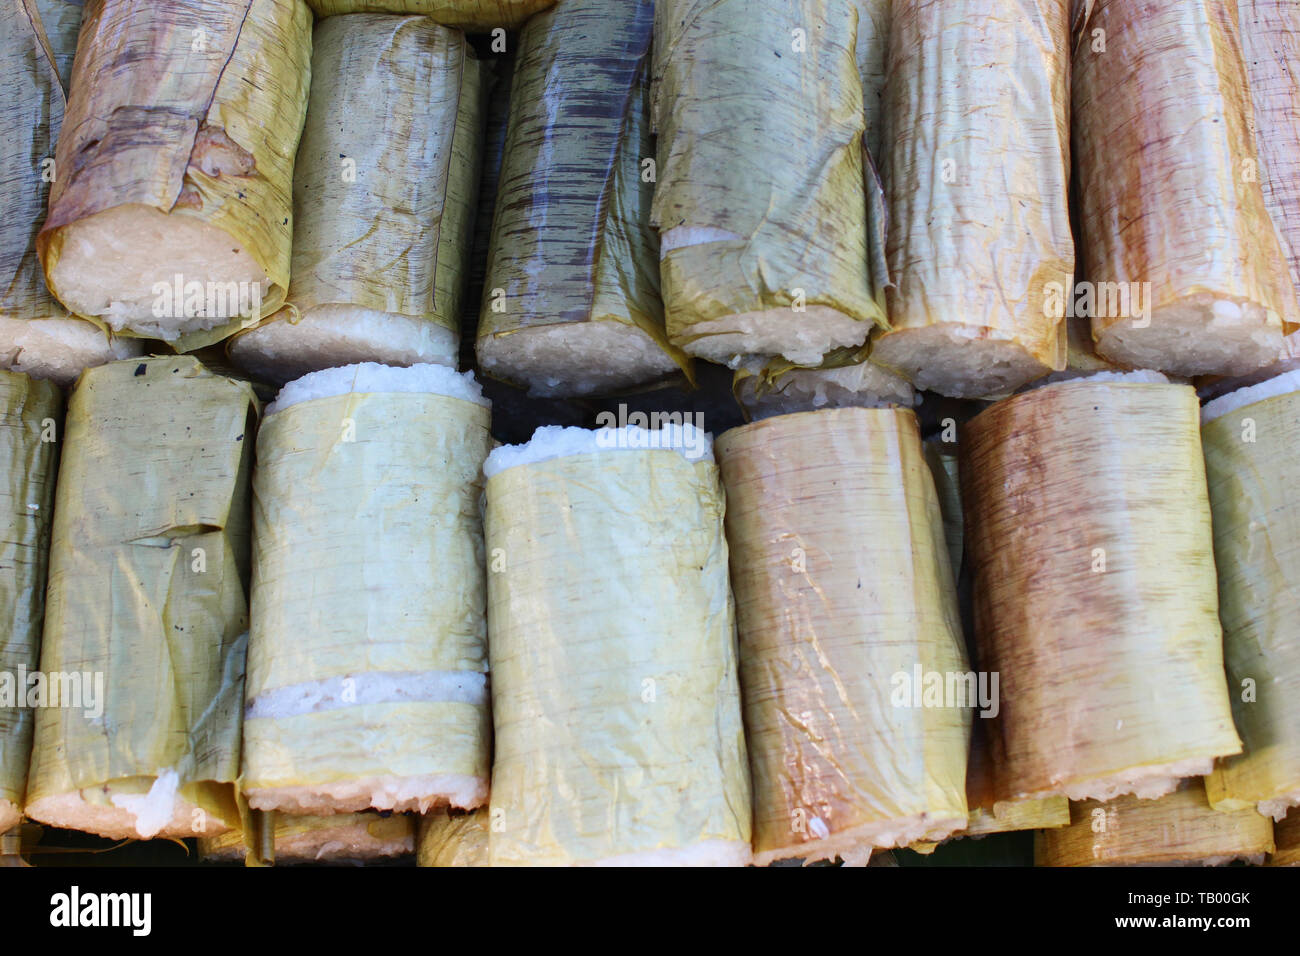 Street food called lemang (rice dumpling) a Malaysian local food and a must delicacy during festive season in Malaysia, Singapore, Indonesia and Brune Stock Photo